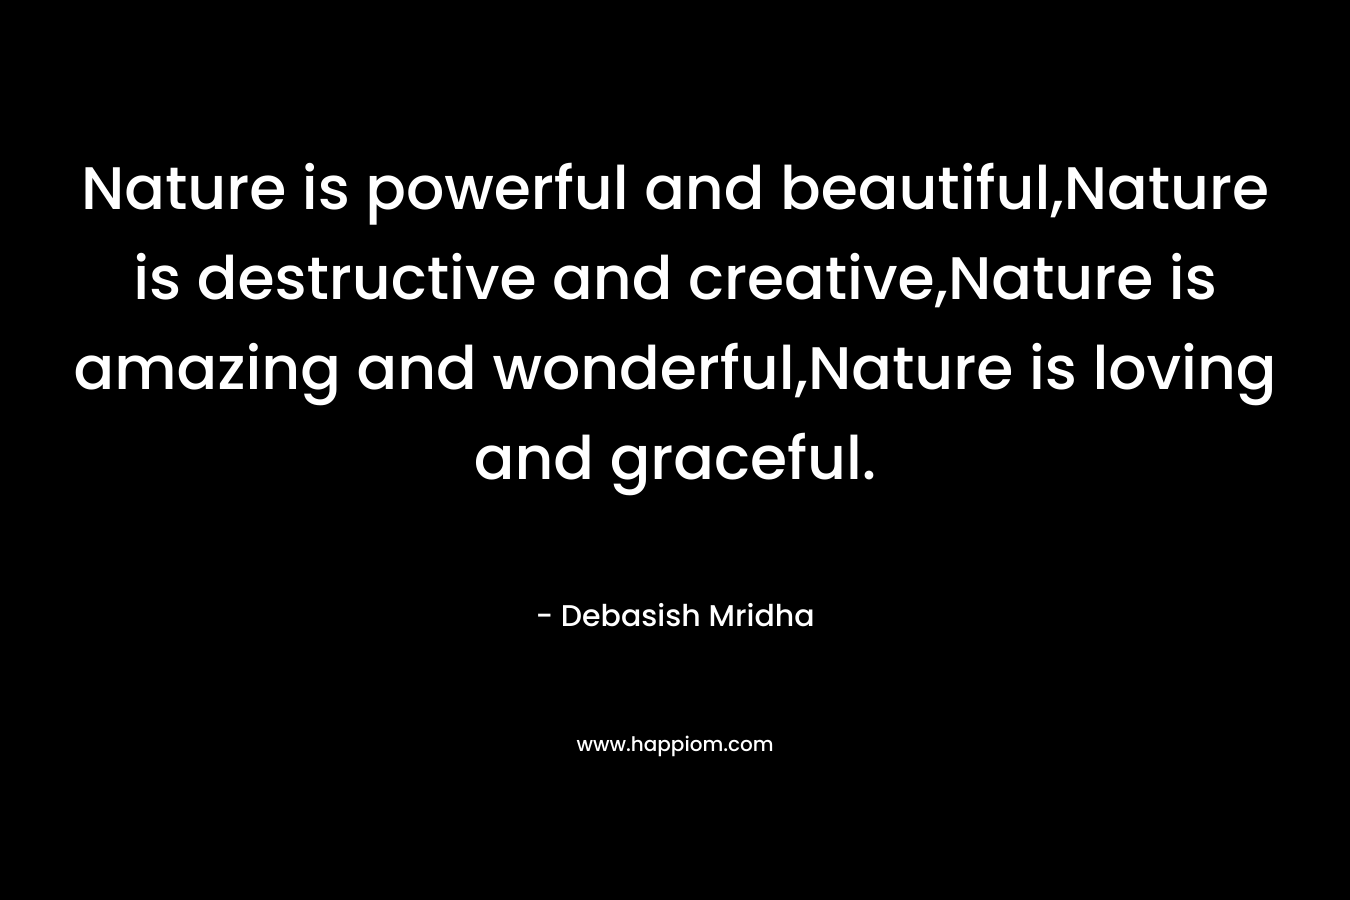 Nature is powerful and beautiful,Nature is destructive and creative,Nature is amazing and wonderful,Nature is loving and graceful.